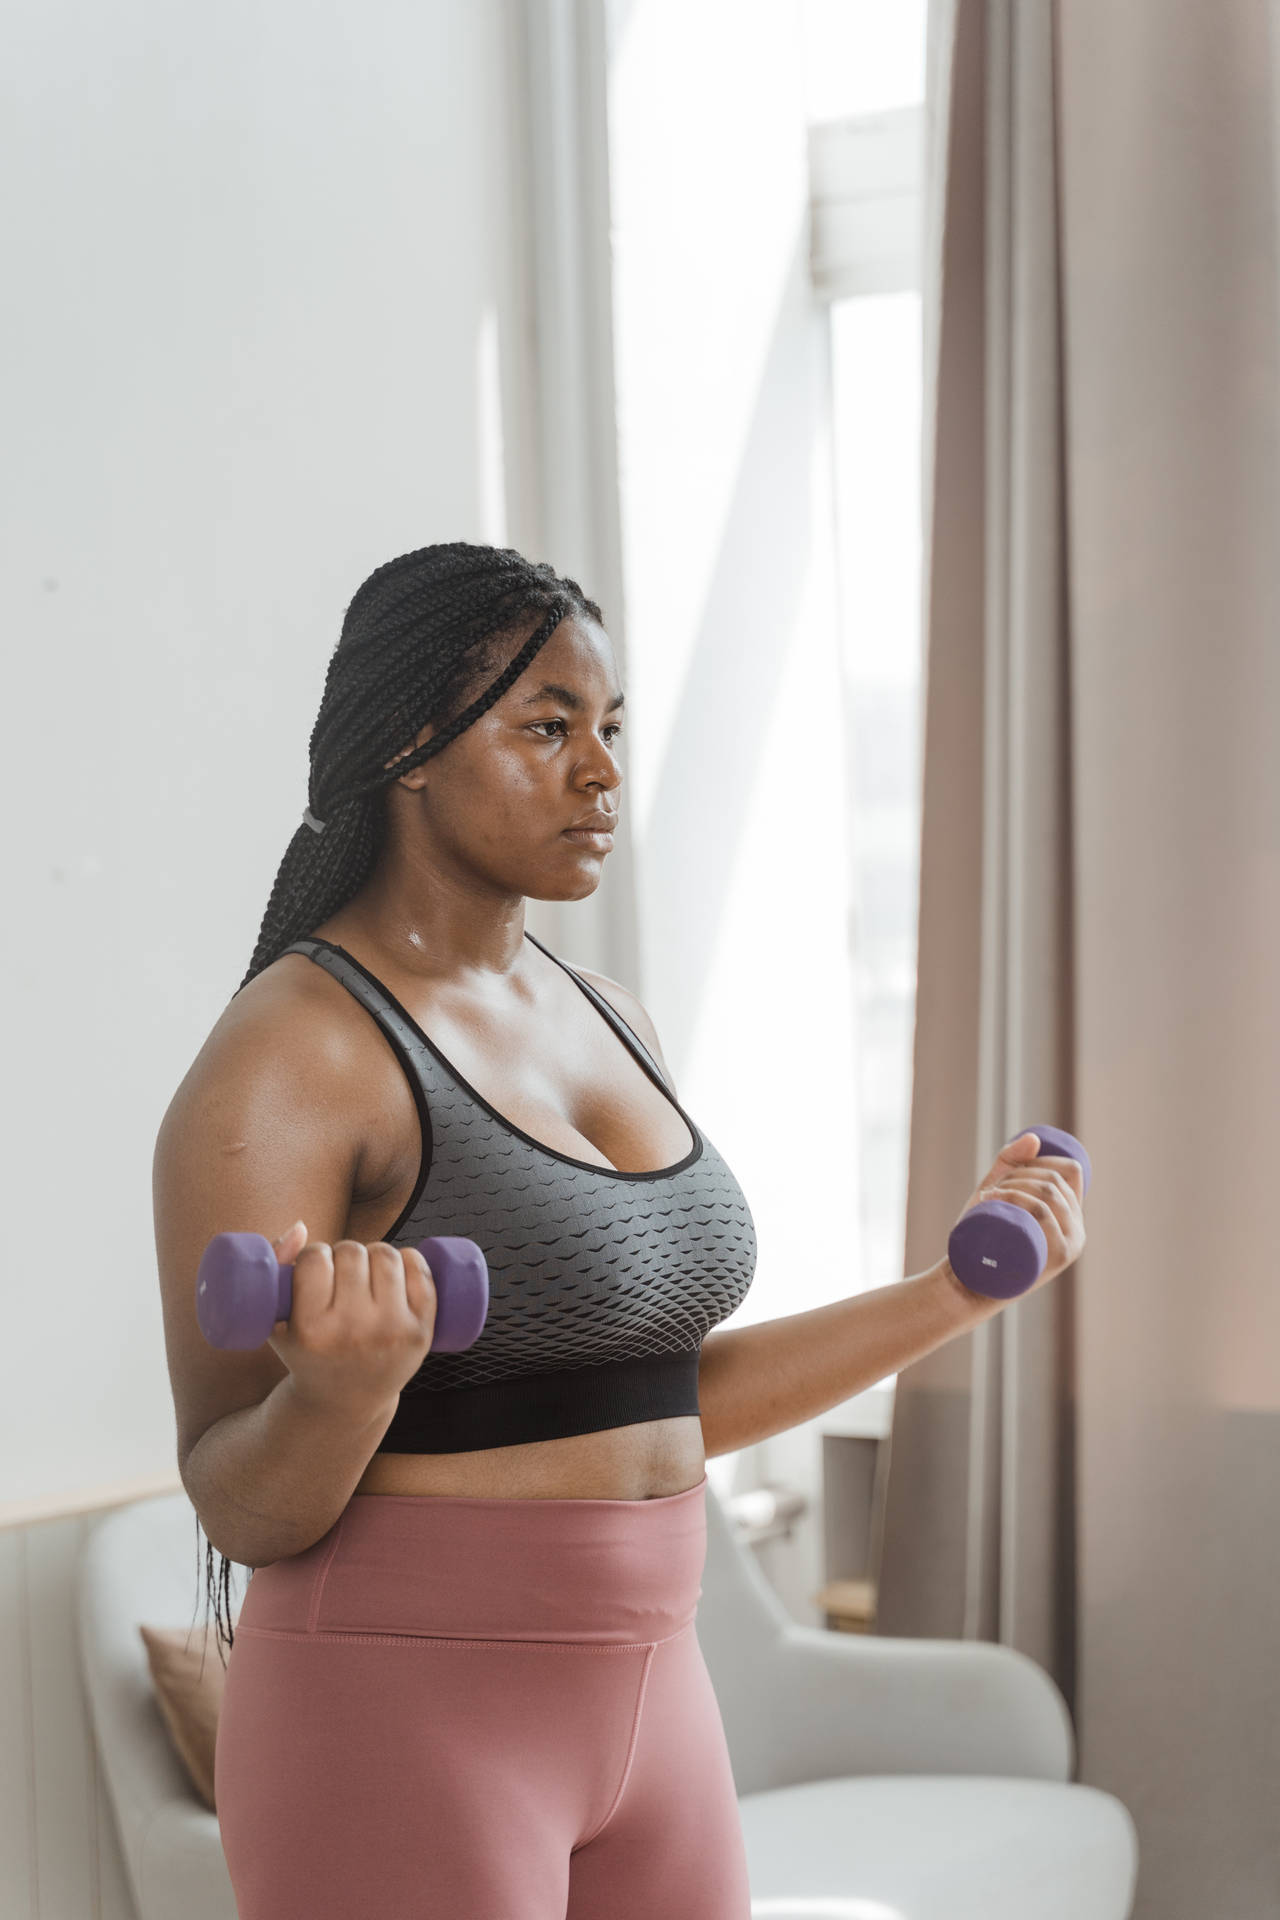 Plus Size Woman Exhibits Strength in Fitness Wallpaper